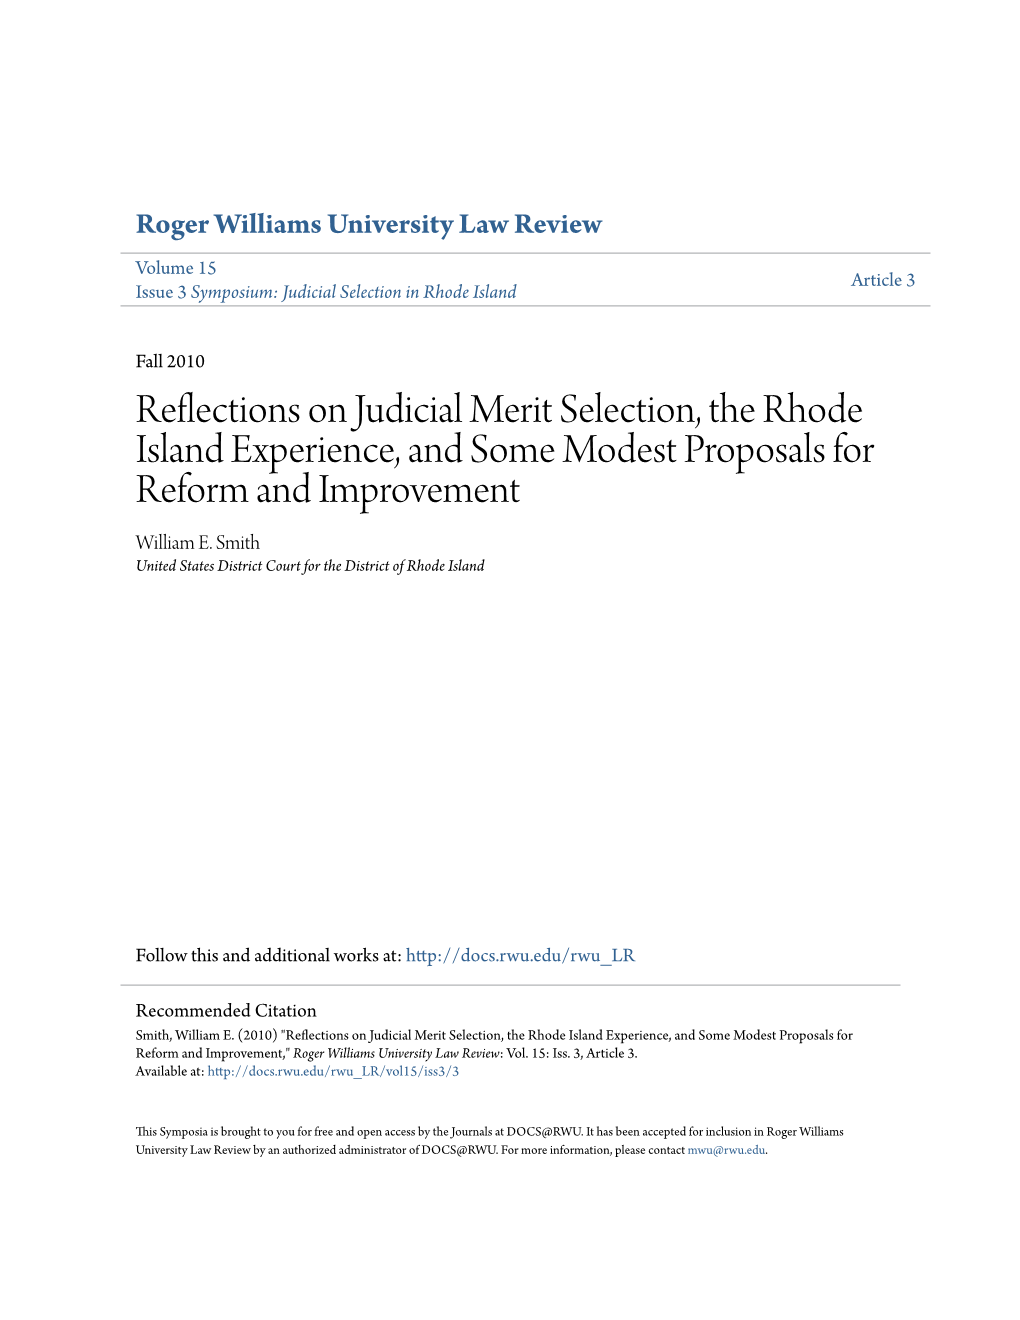 Reflections on Judicial Merit Selection, the Rhode Island Experience, and Some Modest Proposals for Reform and Improvement William E